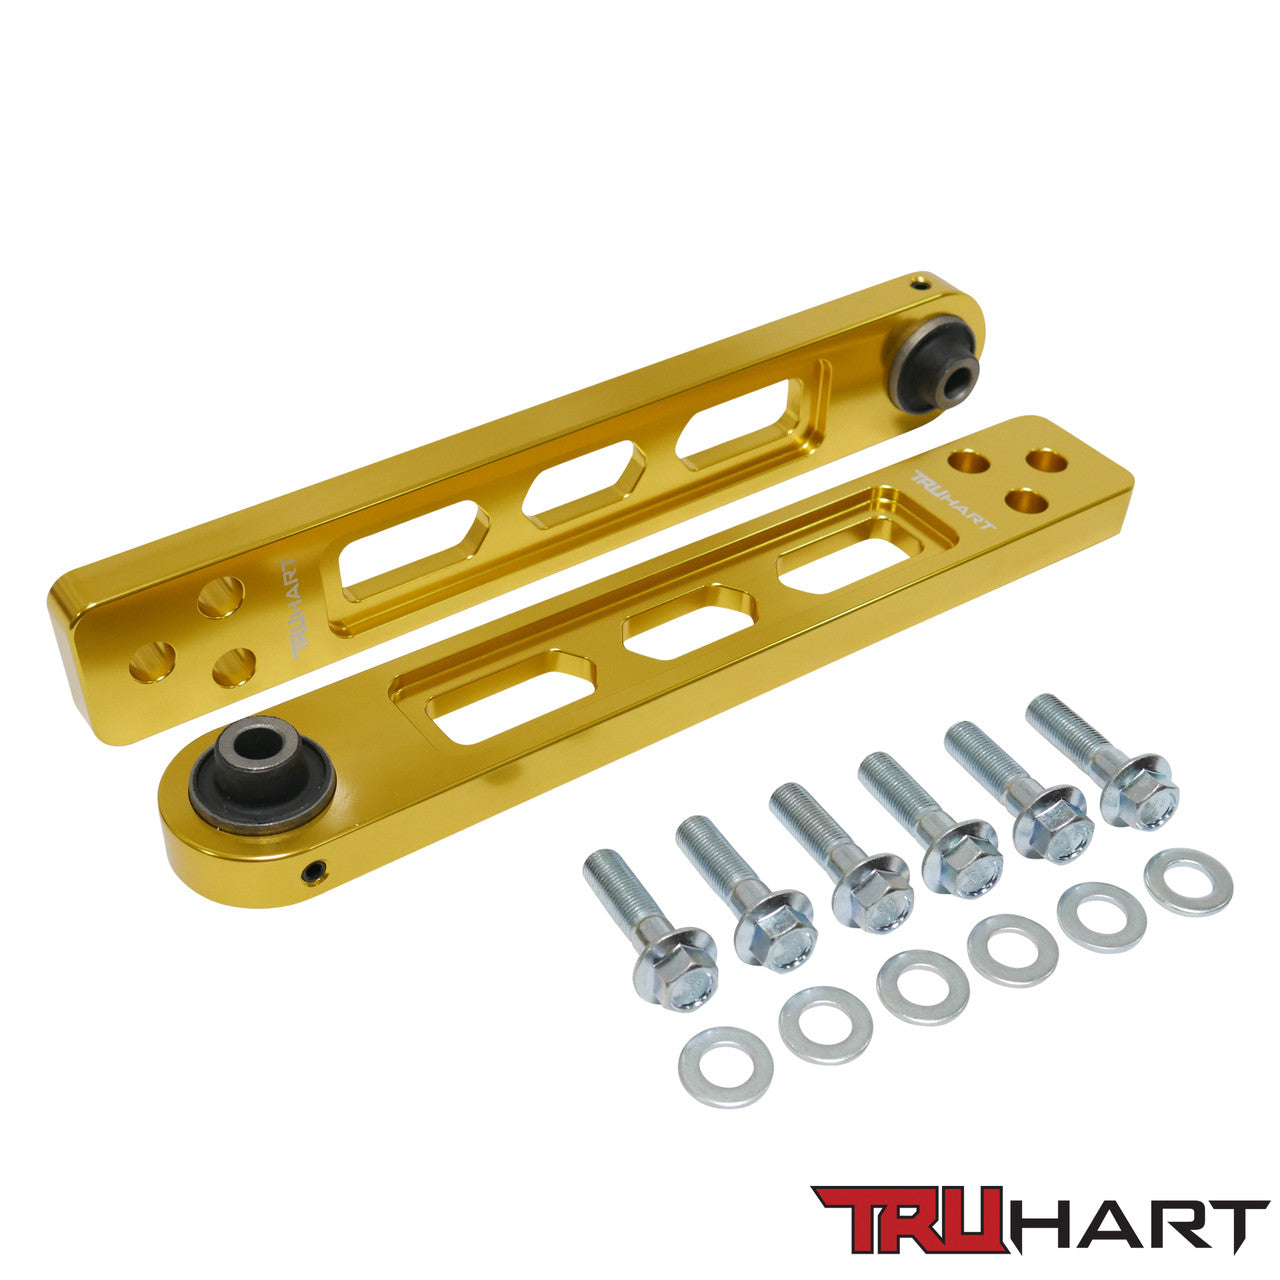 TruHart - Rear Lower Control Arms for 01-05 Civic